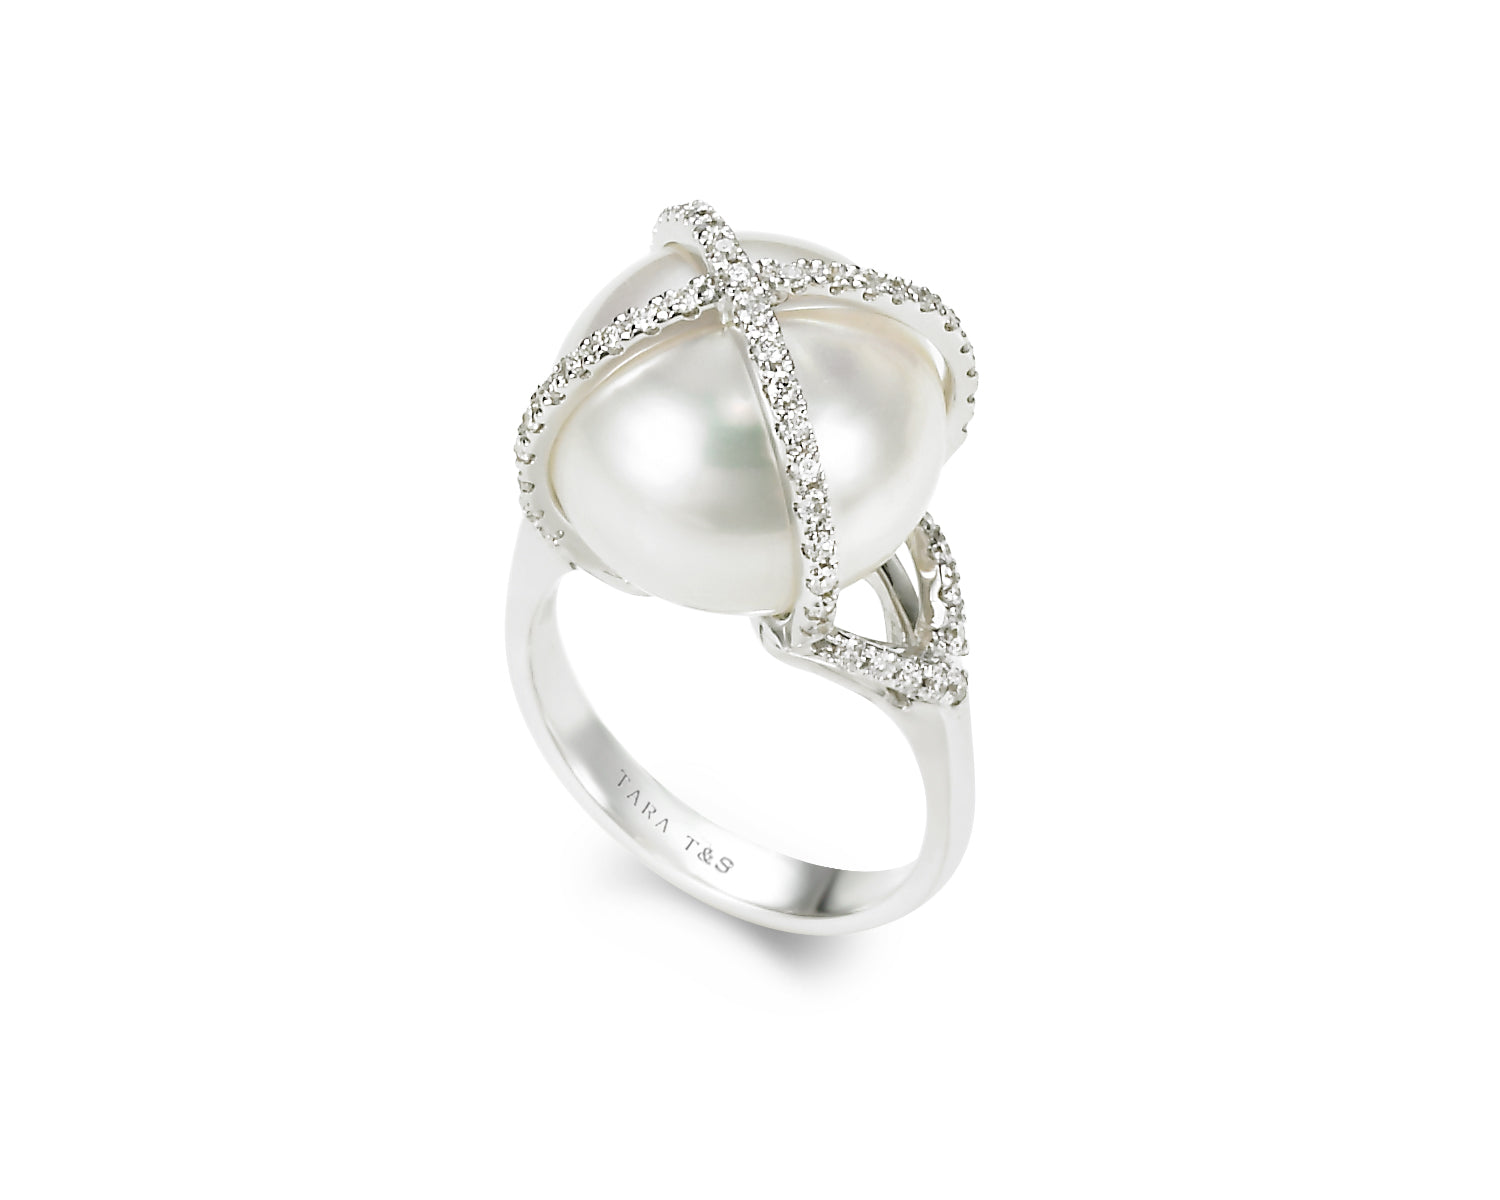 14-16mm White South Sea Pearl and Diamomd Ring